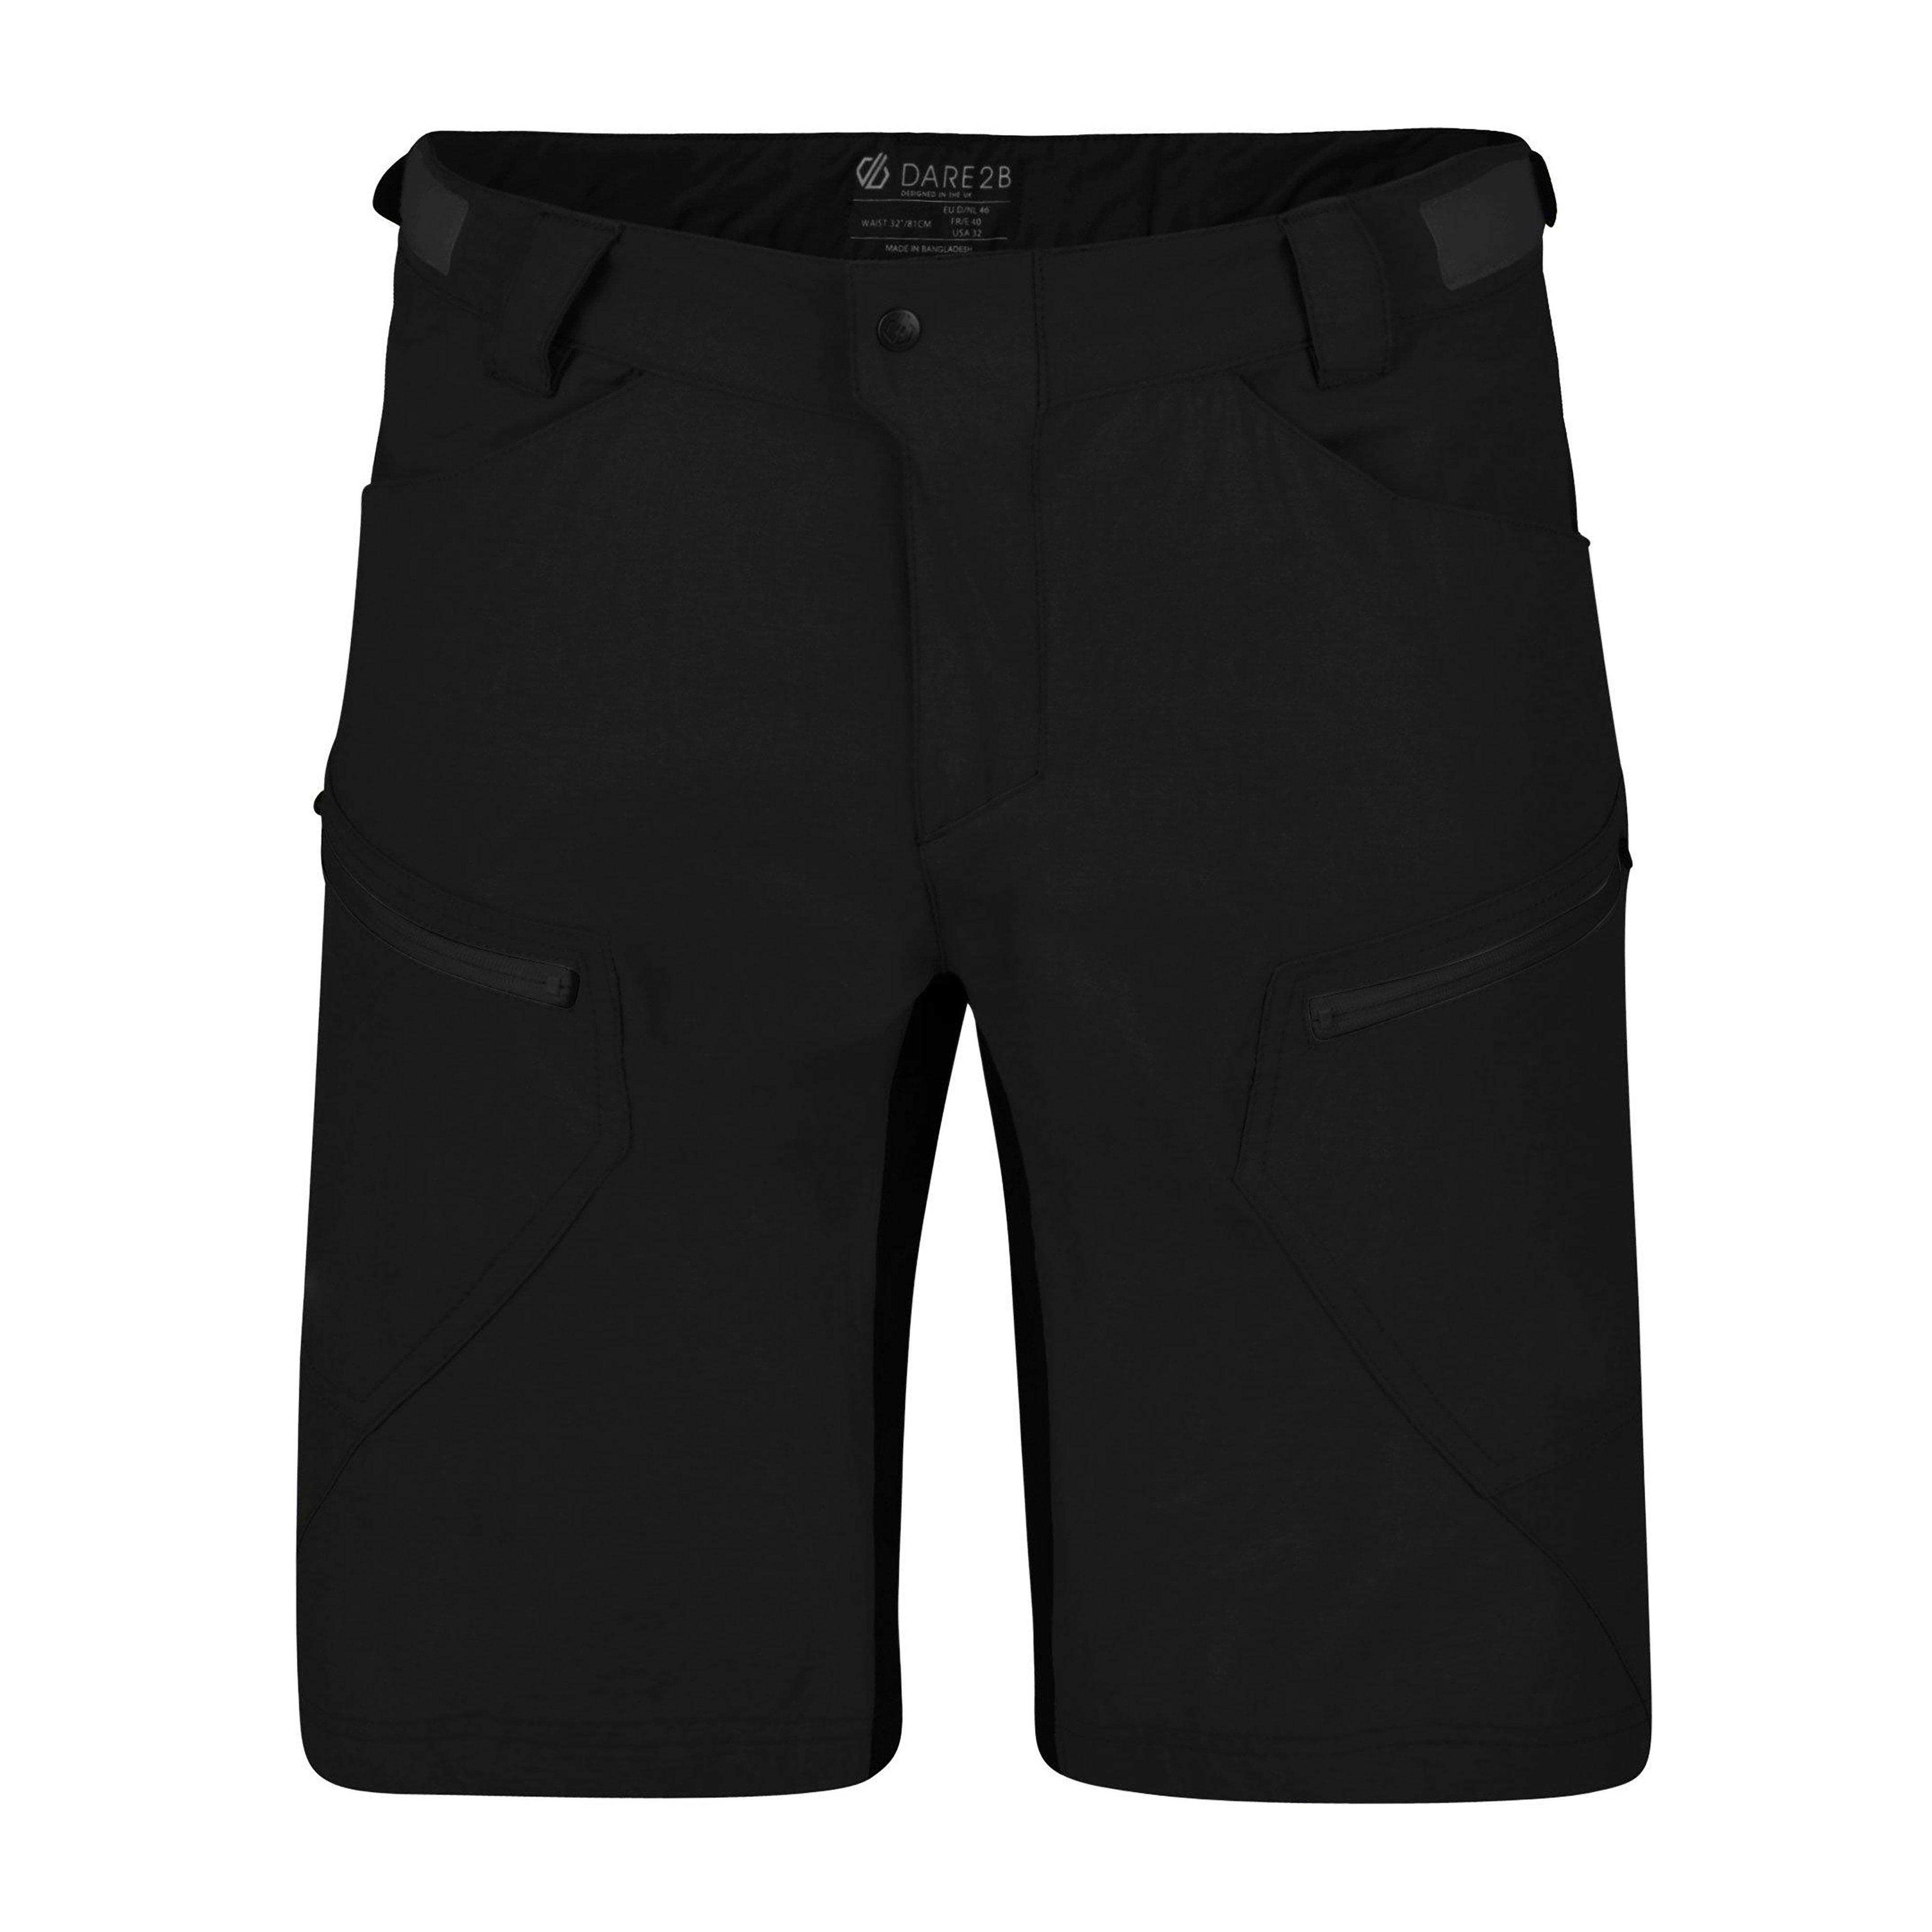 Dare 2B Men's Renew Cycle Shorts Review